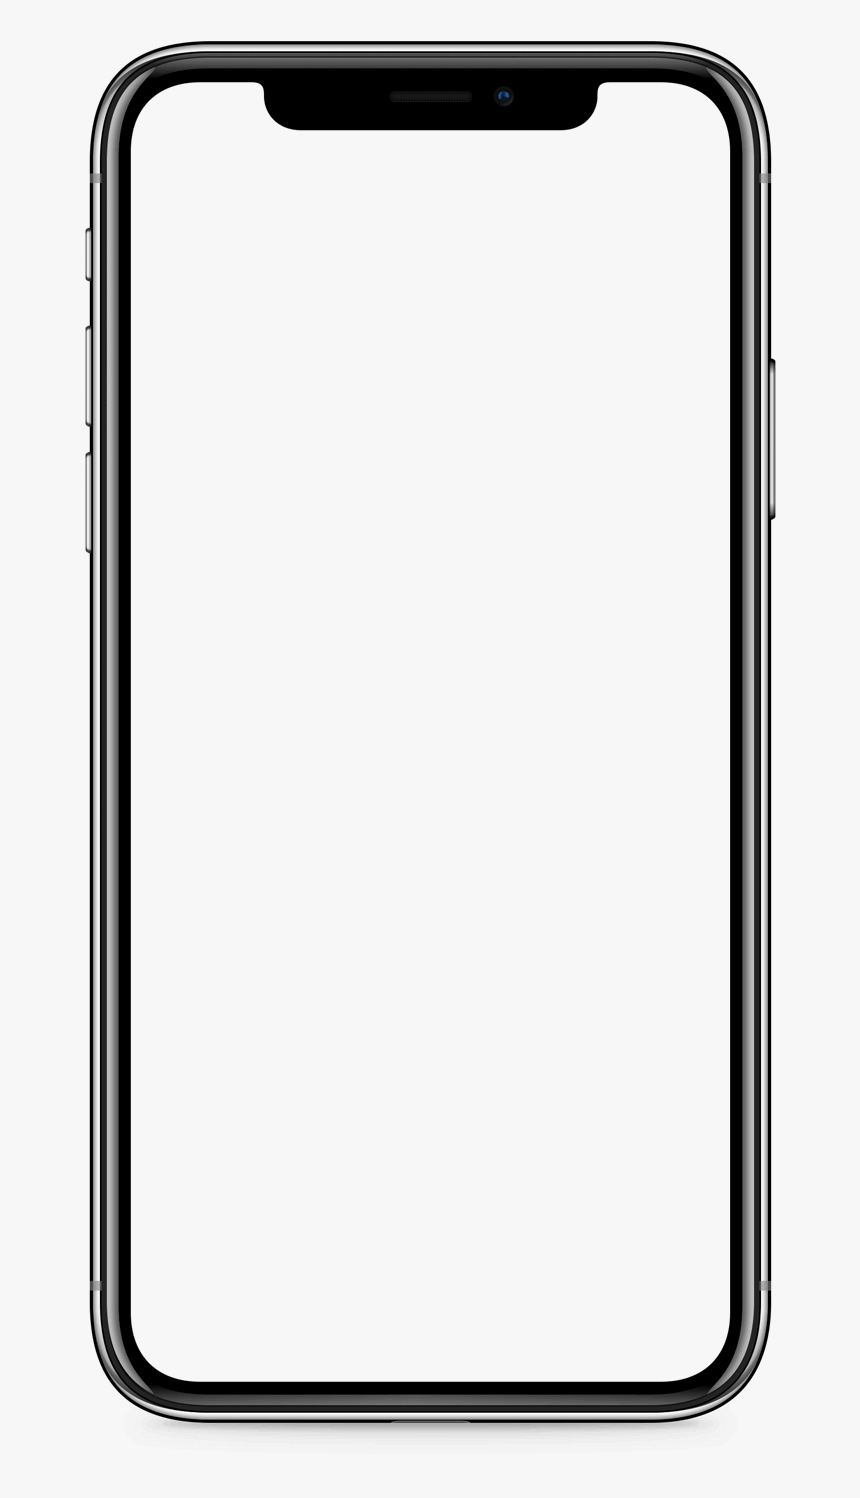 Iphone - Iphone X Overlay Png